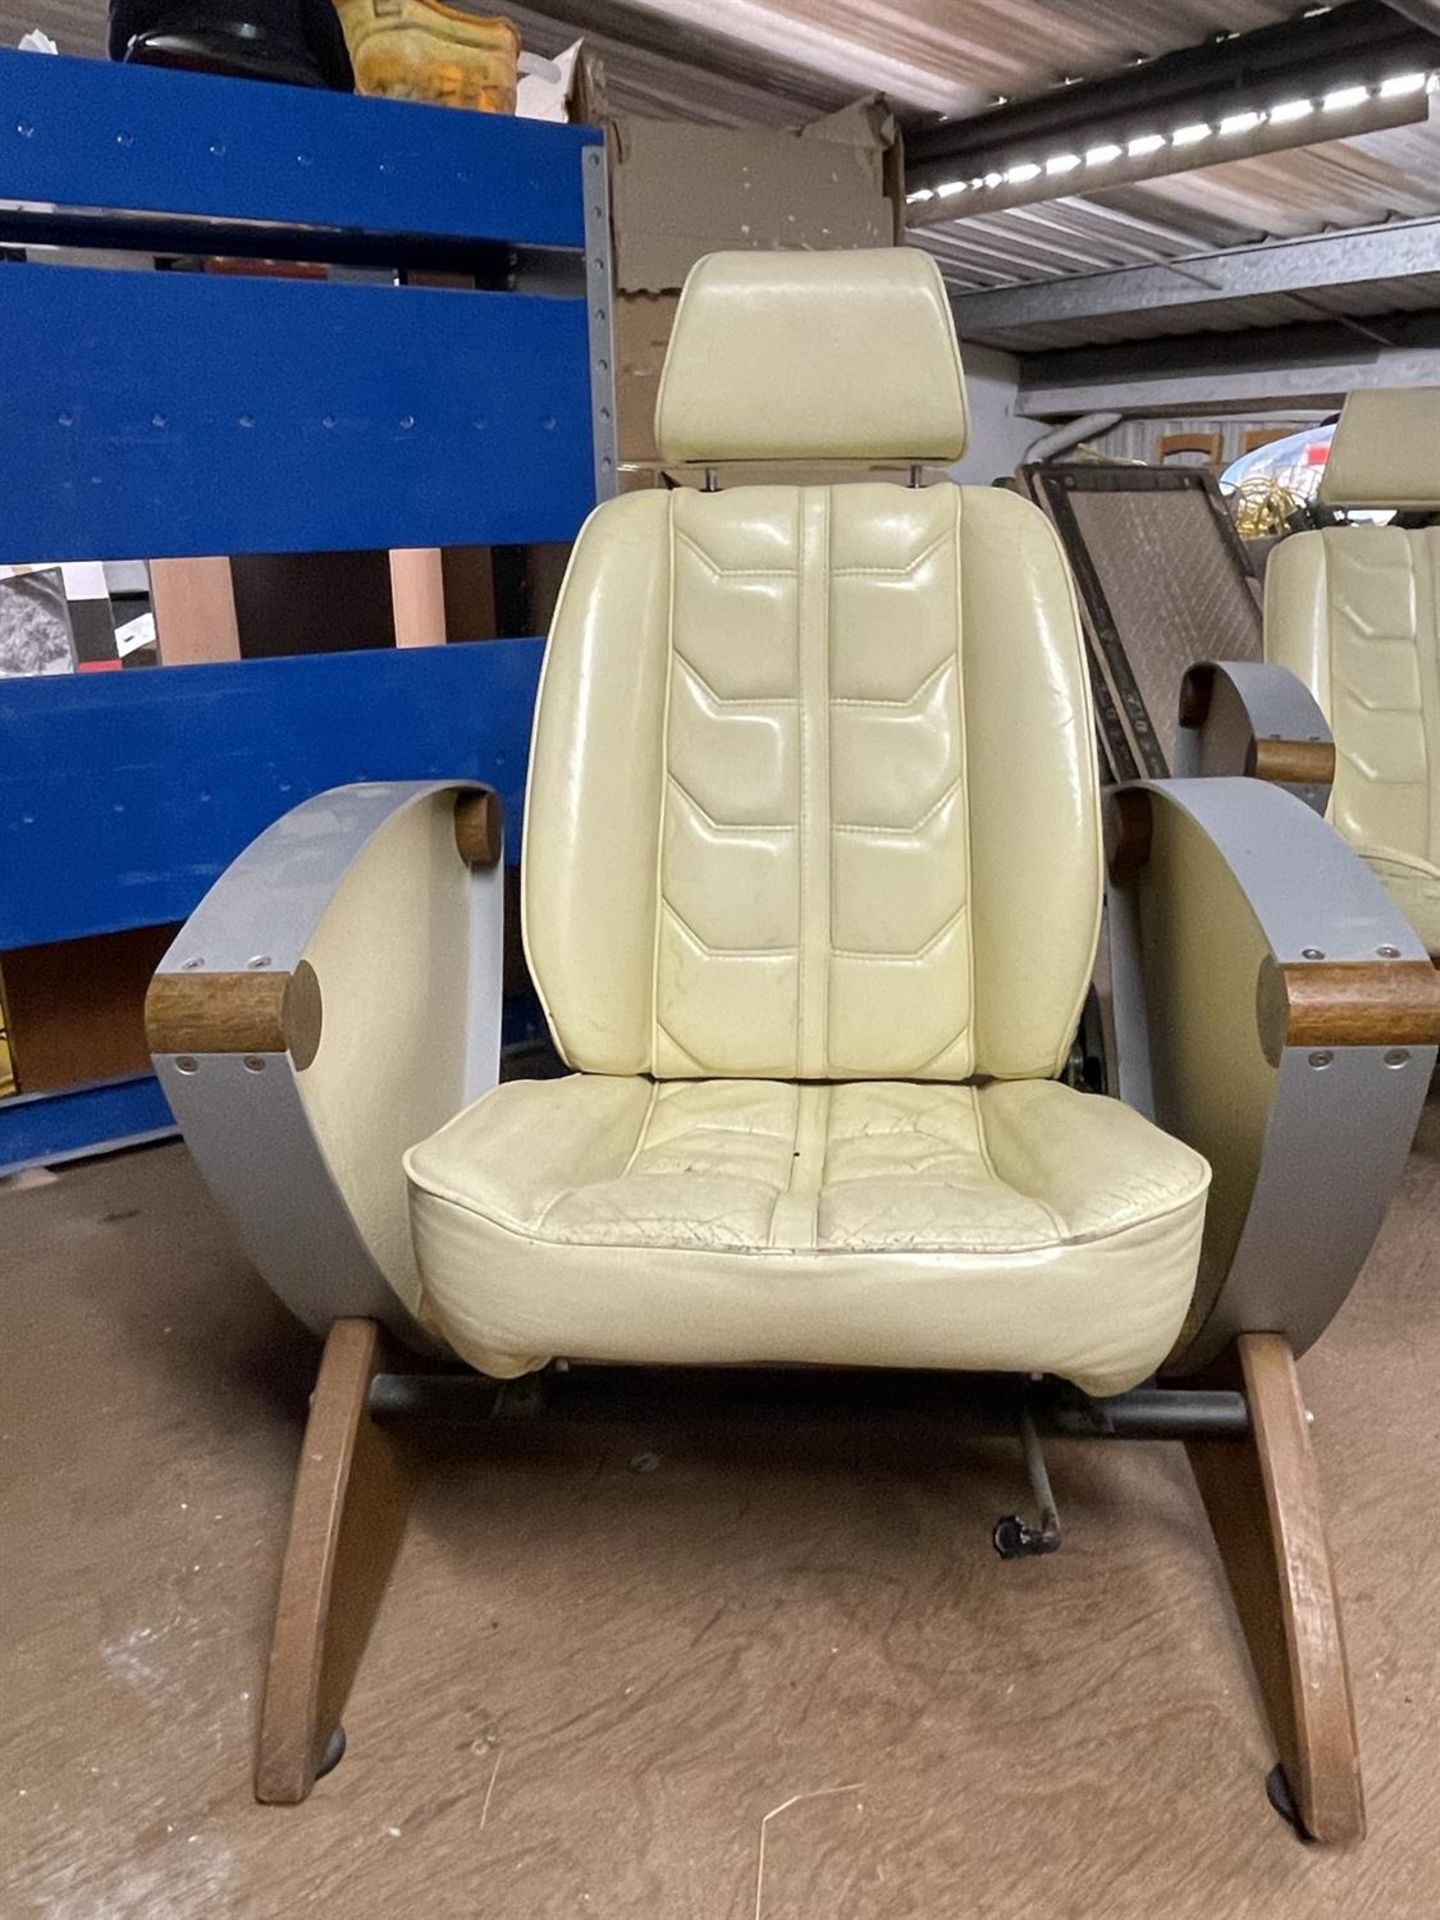 Pair of Ferrari 308 Crema Leather Seats on Substantial Bases - Image 10 of 10